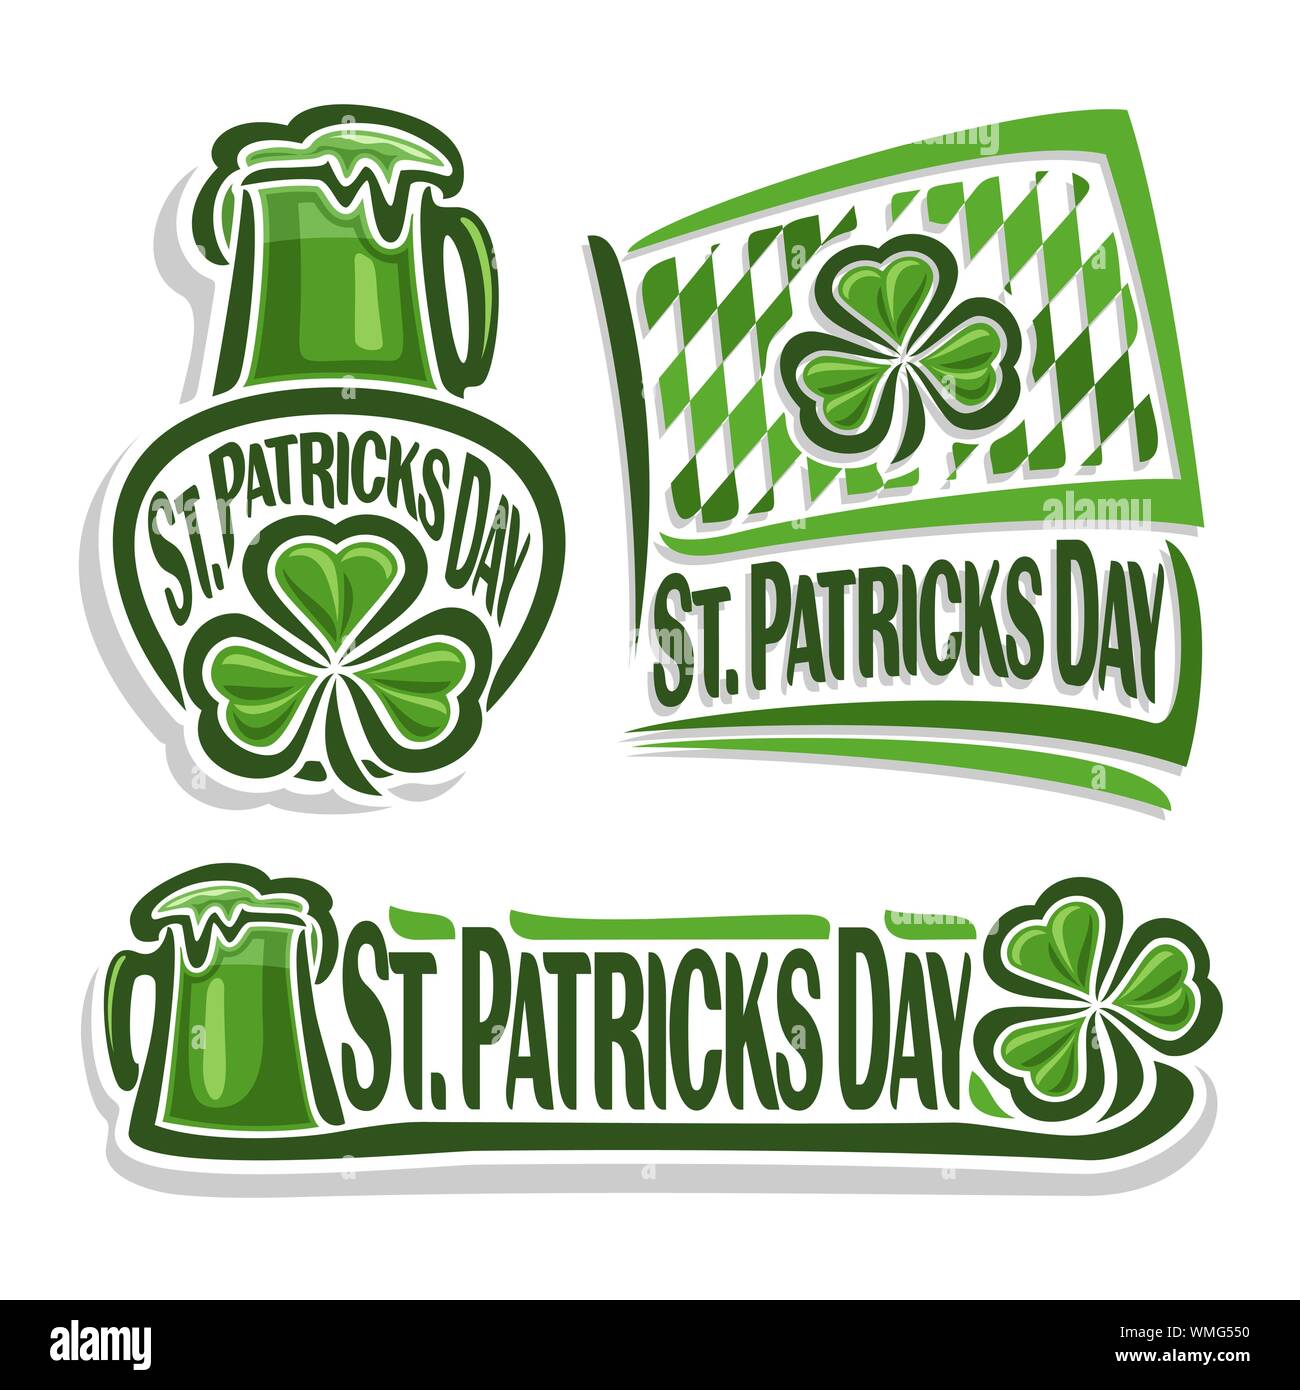 Vector logo for St. Patrick's Day with Shamrock, sign with green beer mug, flag for saint patrick day with shamrock leaf and rhombus pattern. Stock Vector